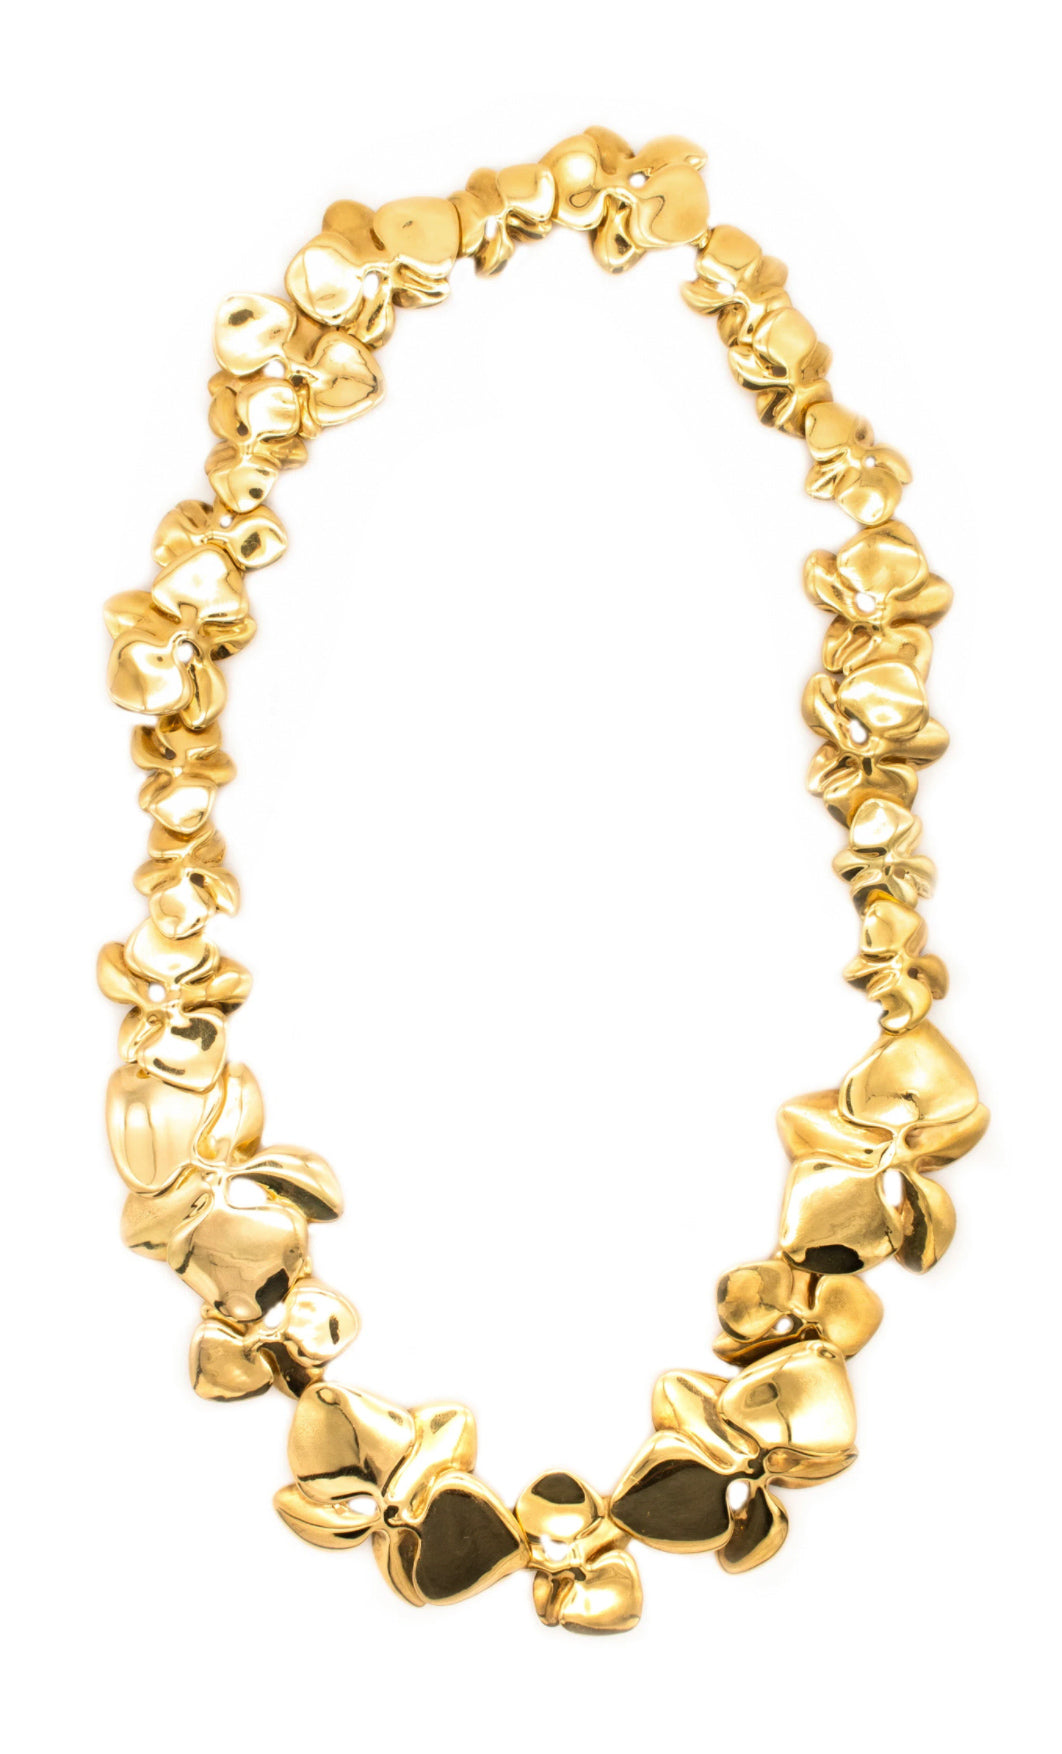 *Angela Cummings 1984 New York Orchids flowers necklace in solid 18 kt yellow gold